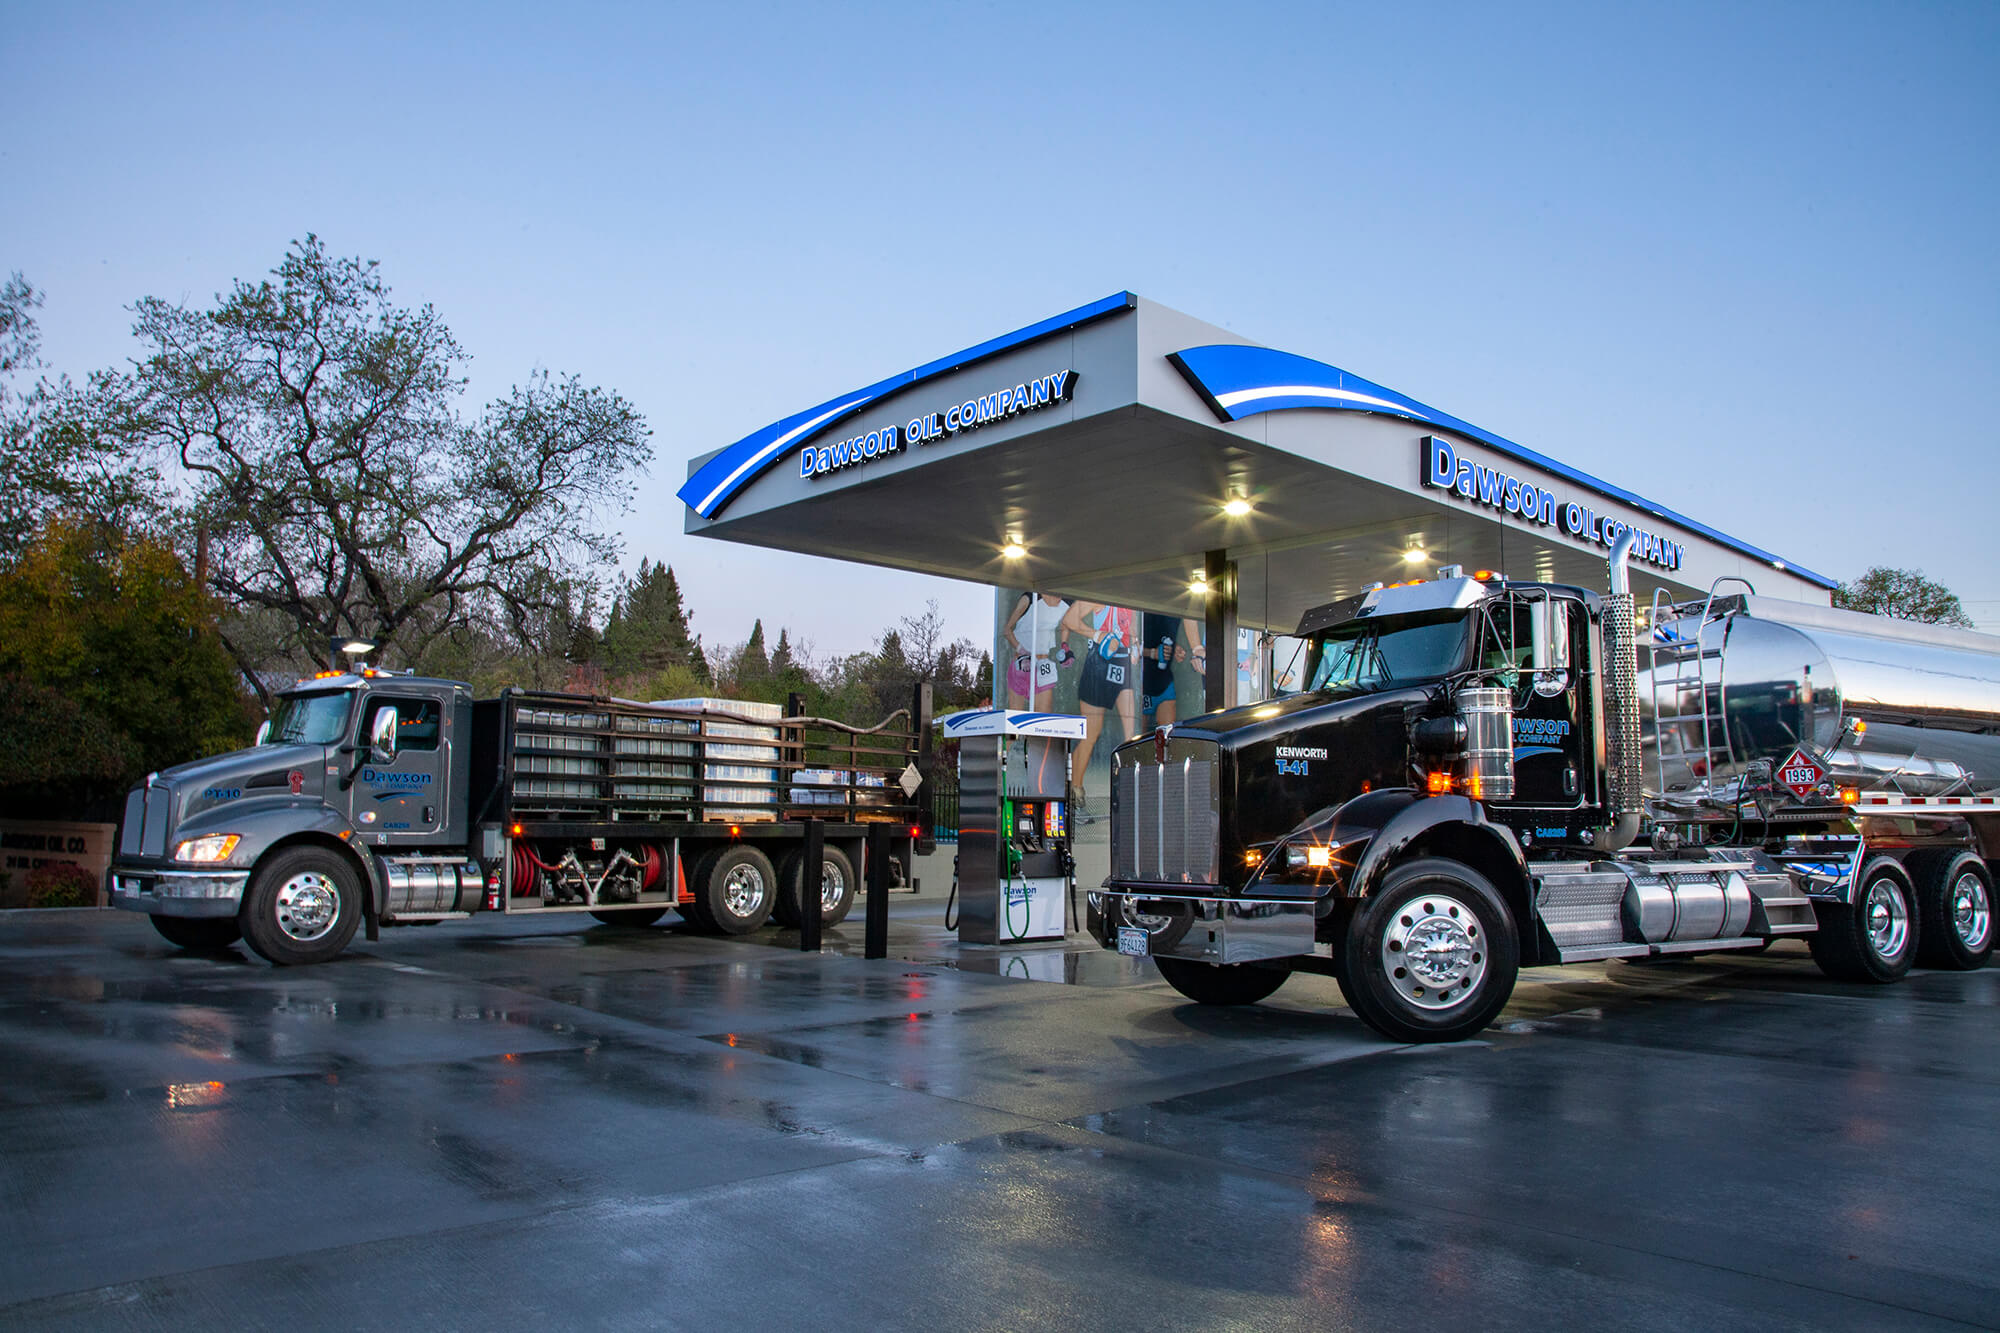 Since 1971, we've served Northern California's fuel and lubricant needs. Find out how Mel Dawson established an enduring family business through hard work.